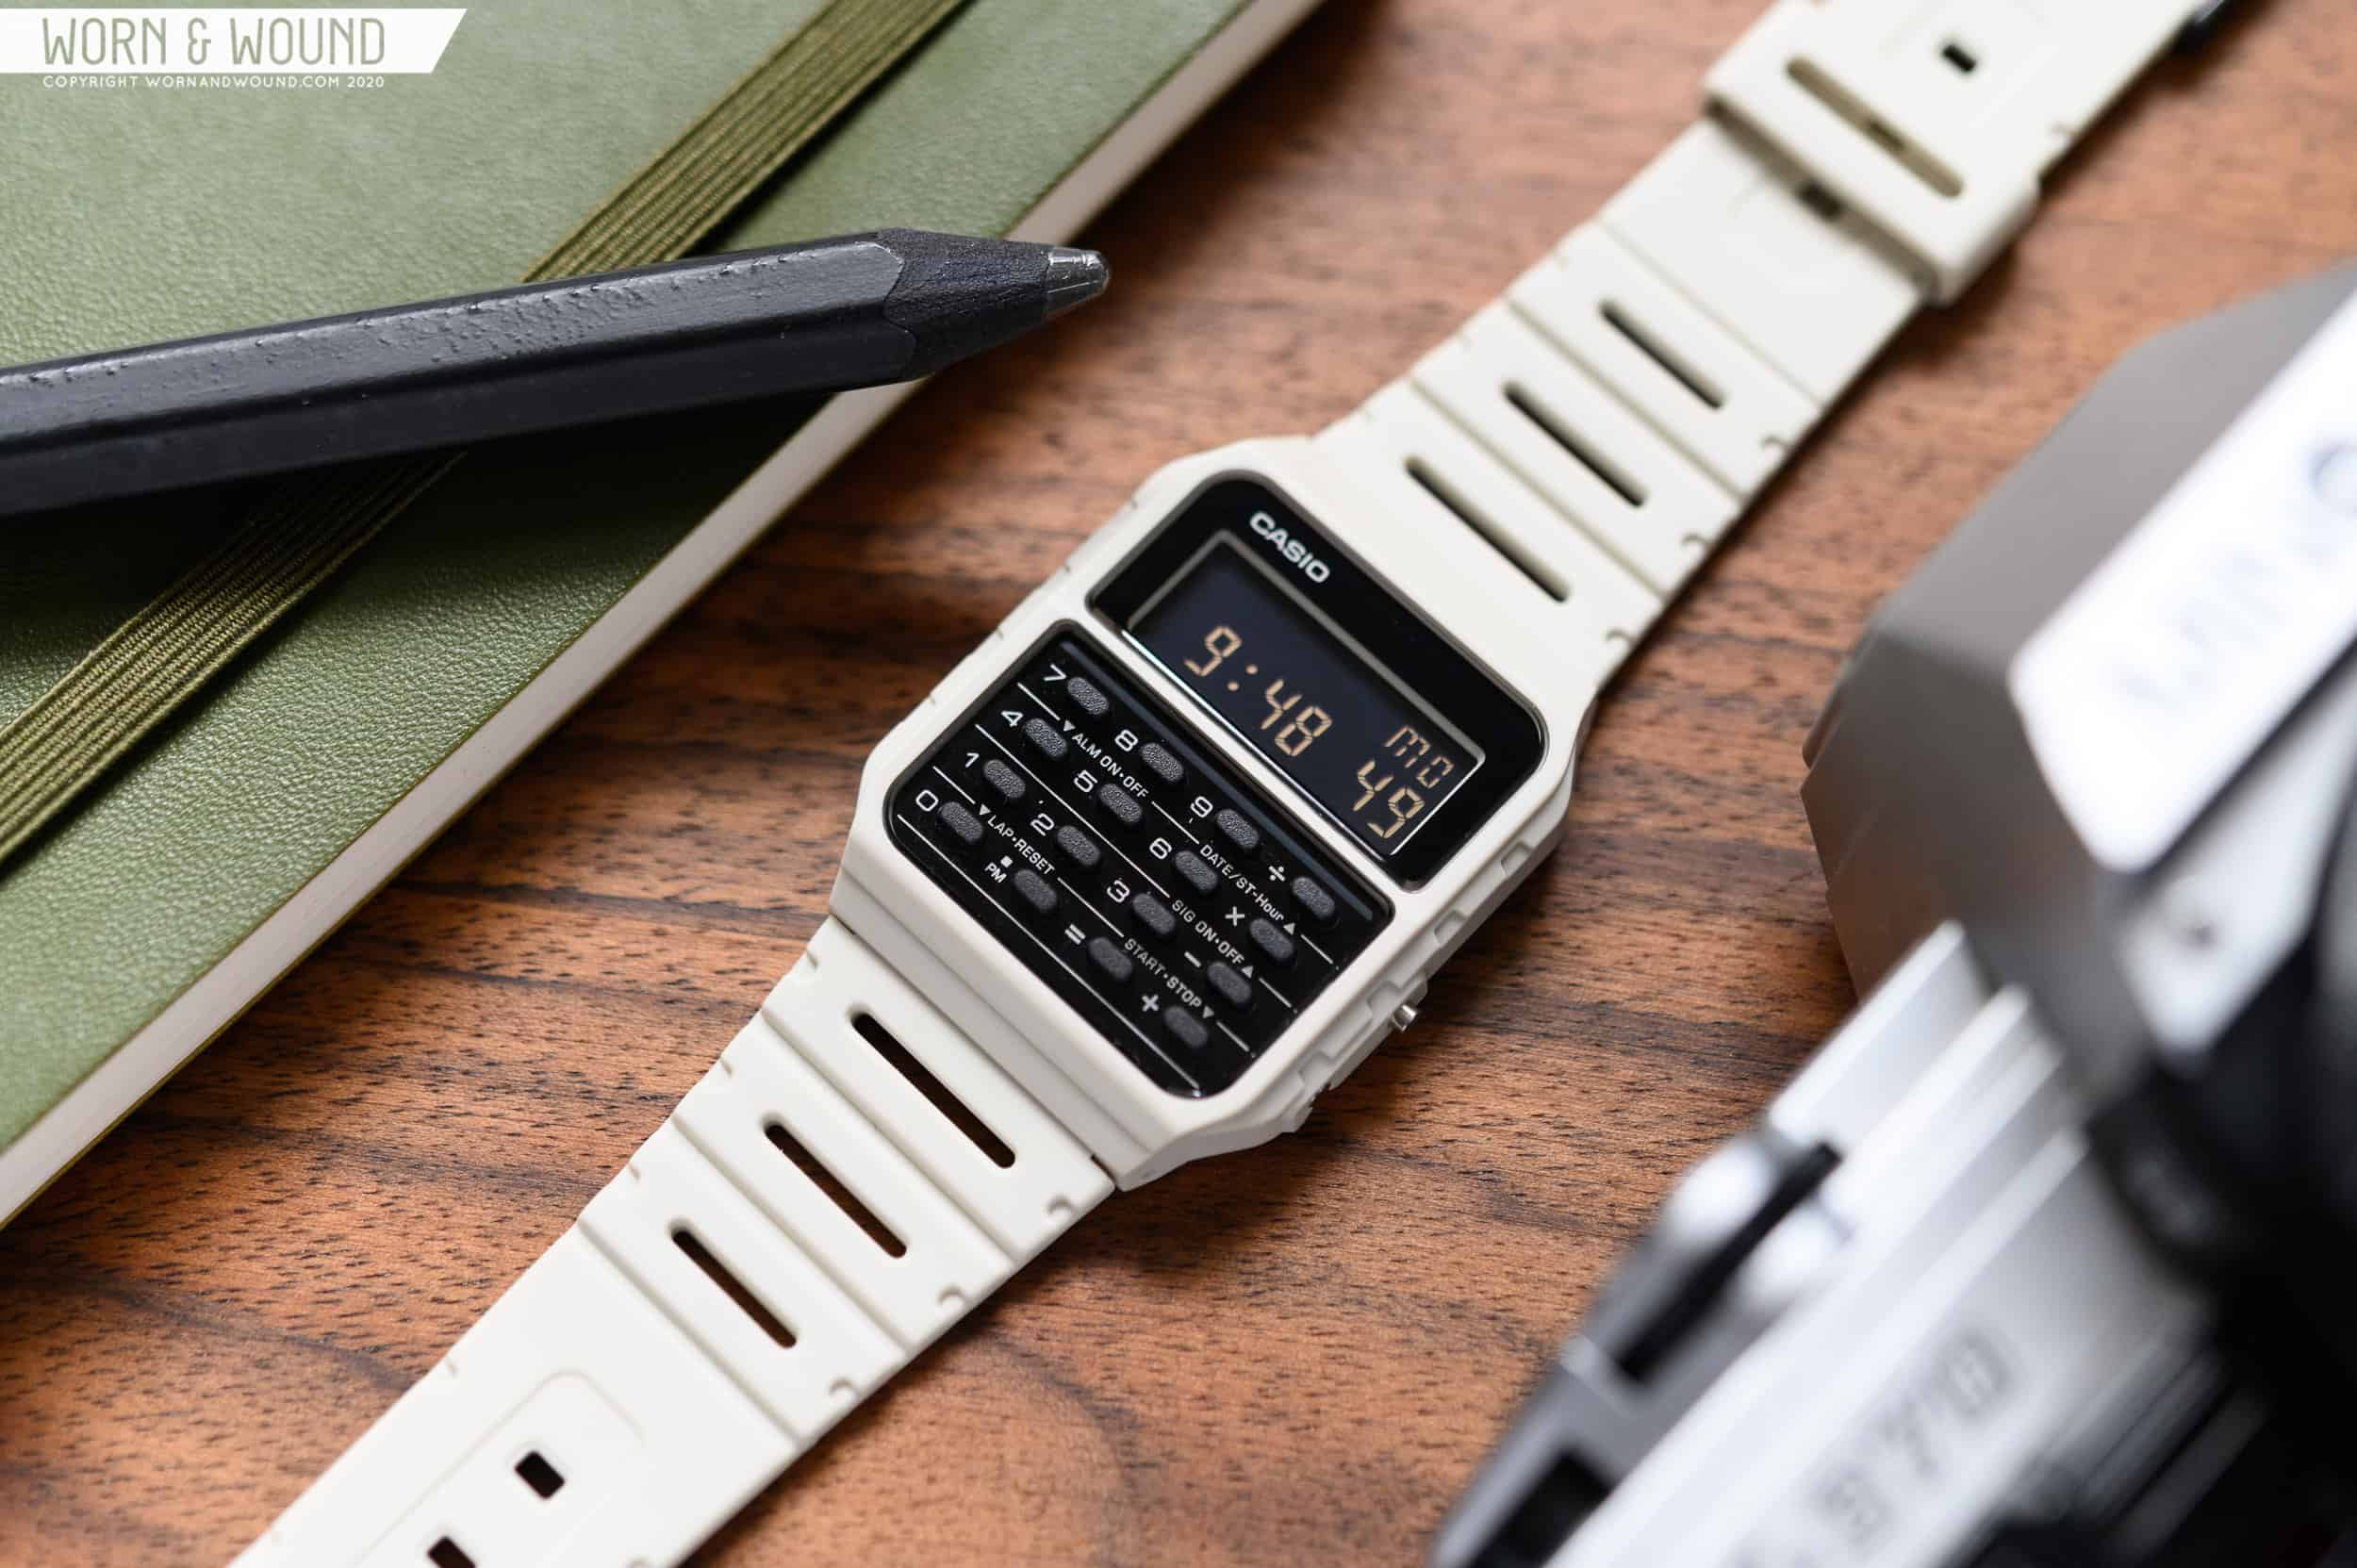 The Casio World Time Review: How Can a Watch Costing Less Than $30 Be So  Good?